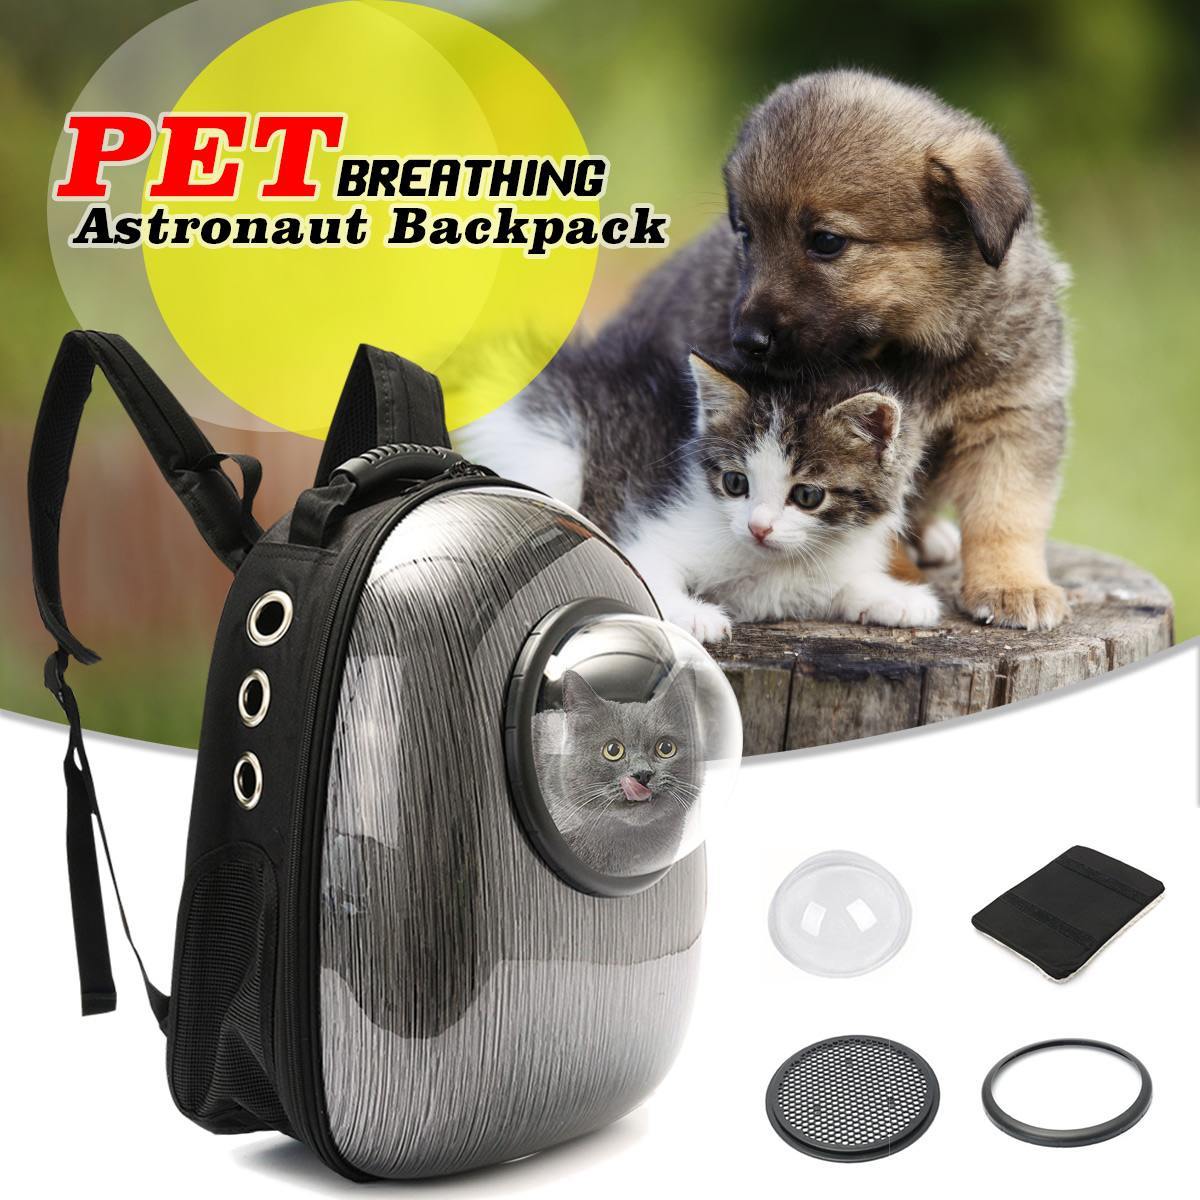 Astronaut Space Capsule Pet Backpack Carrier Transparent Breathable Travel Small Dog Cat Bag